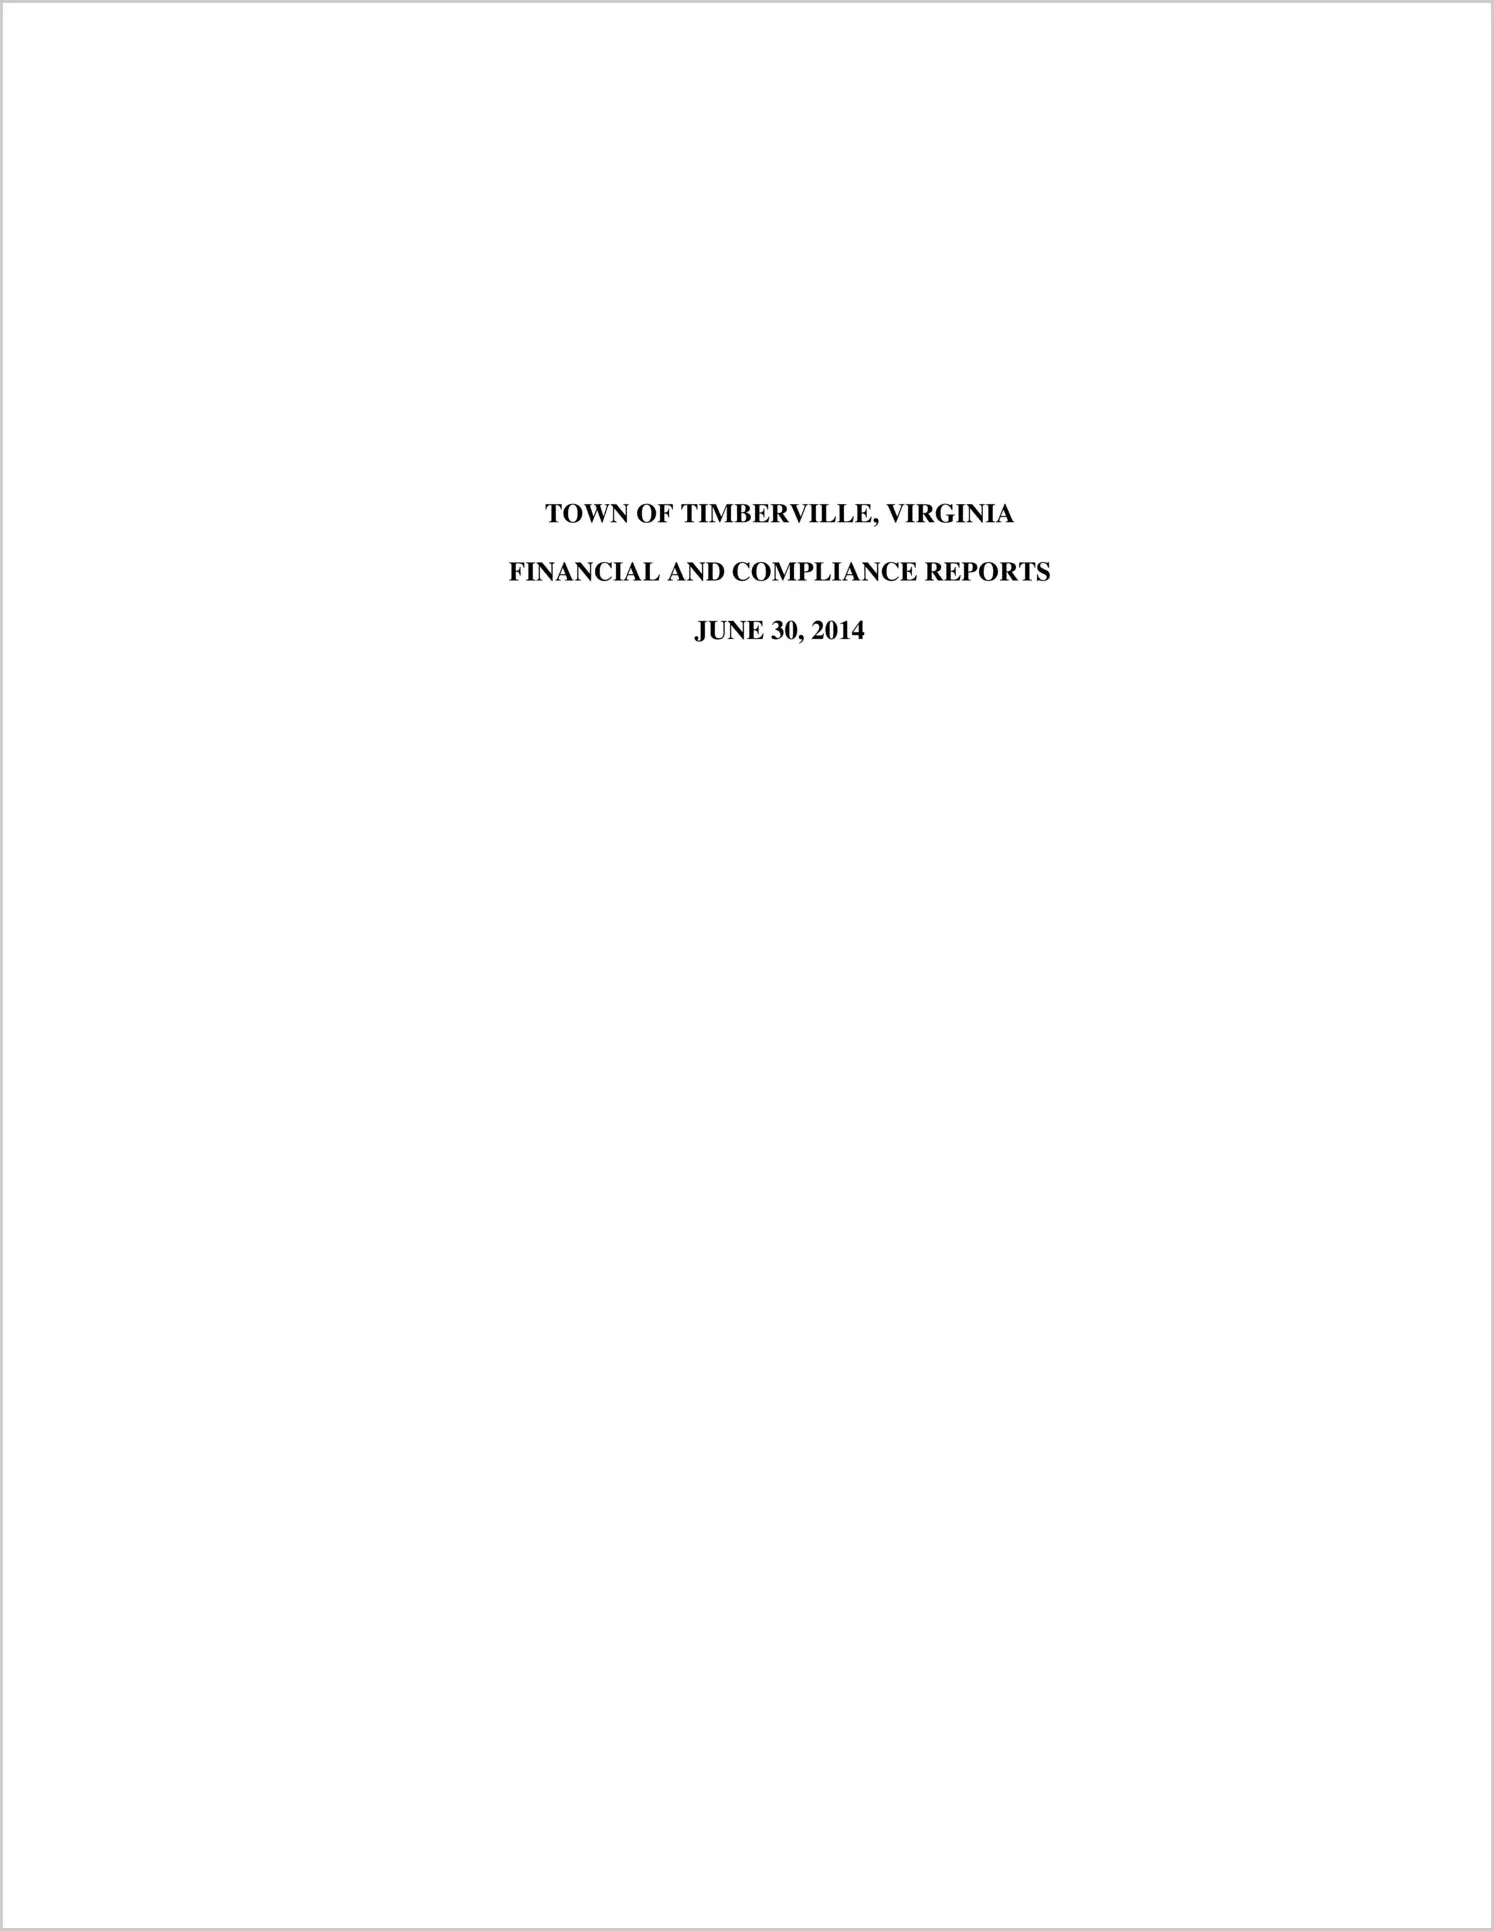 2014 Annual Financial Report for Town of Timberville